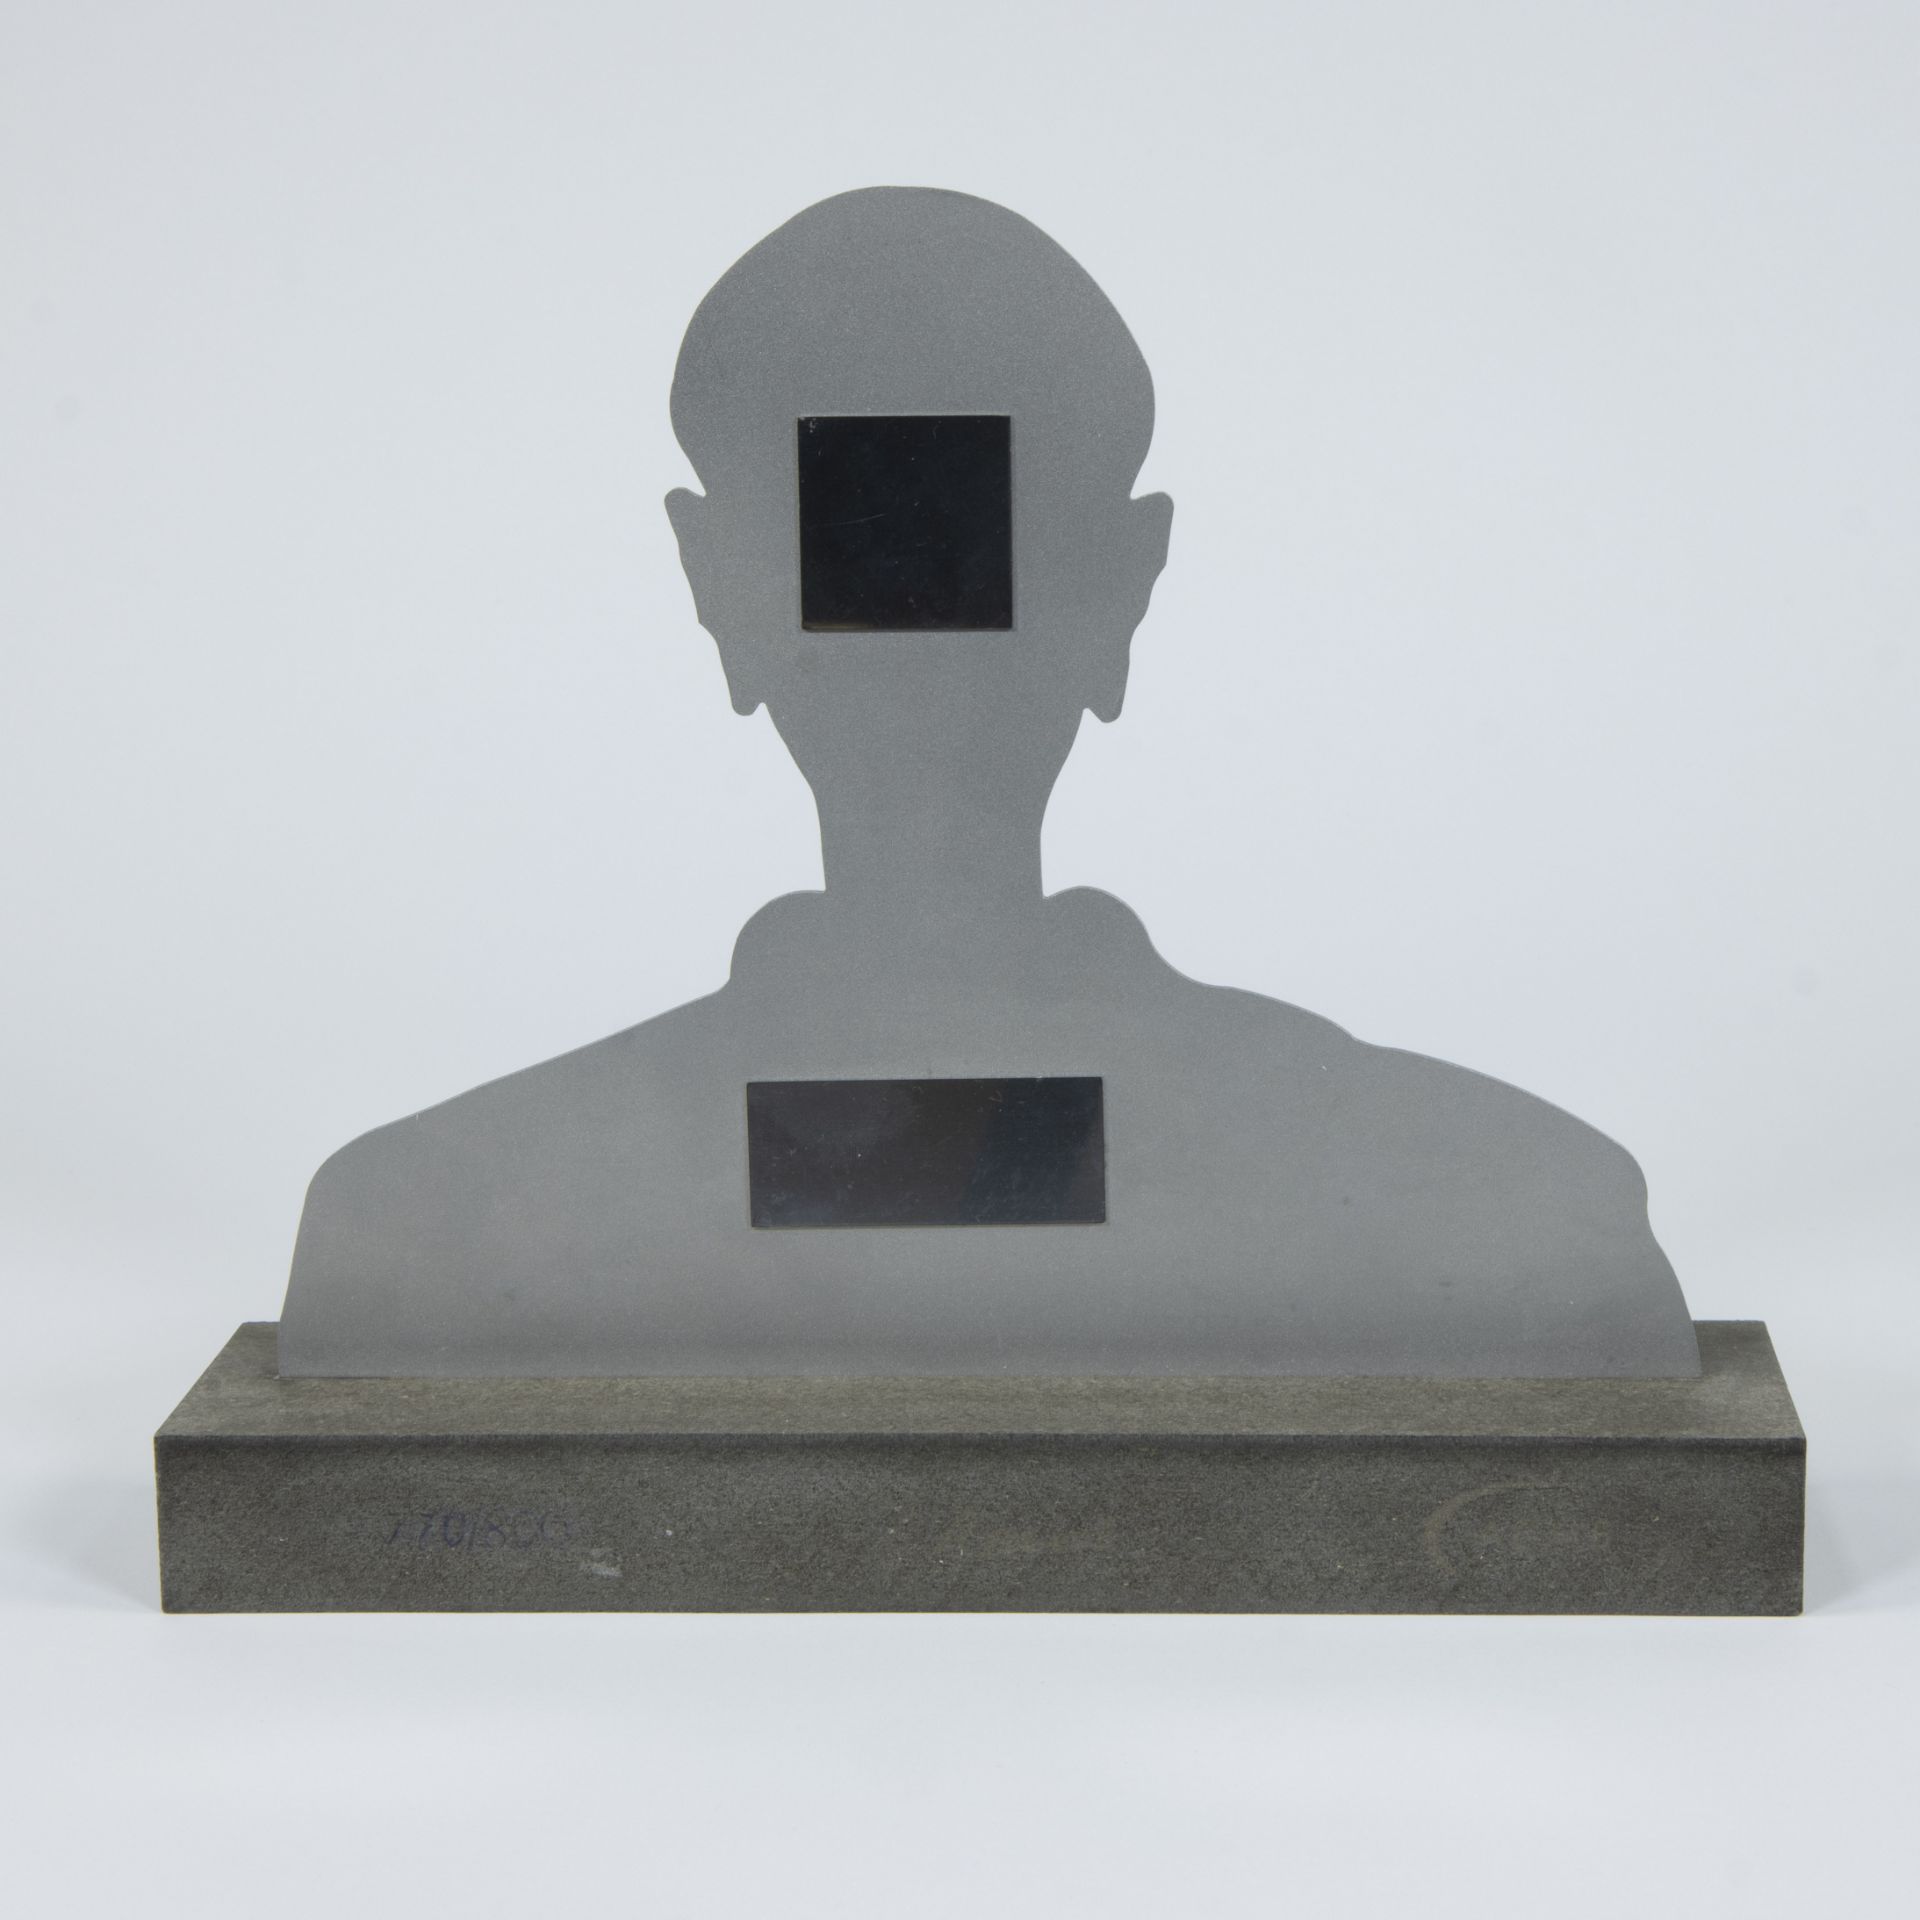 Roger RAVEEL (1921-2013), sculpture with metal and mirrors 'A Confrontation' 2001, numbered 770/800